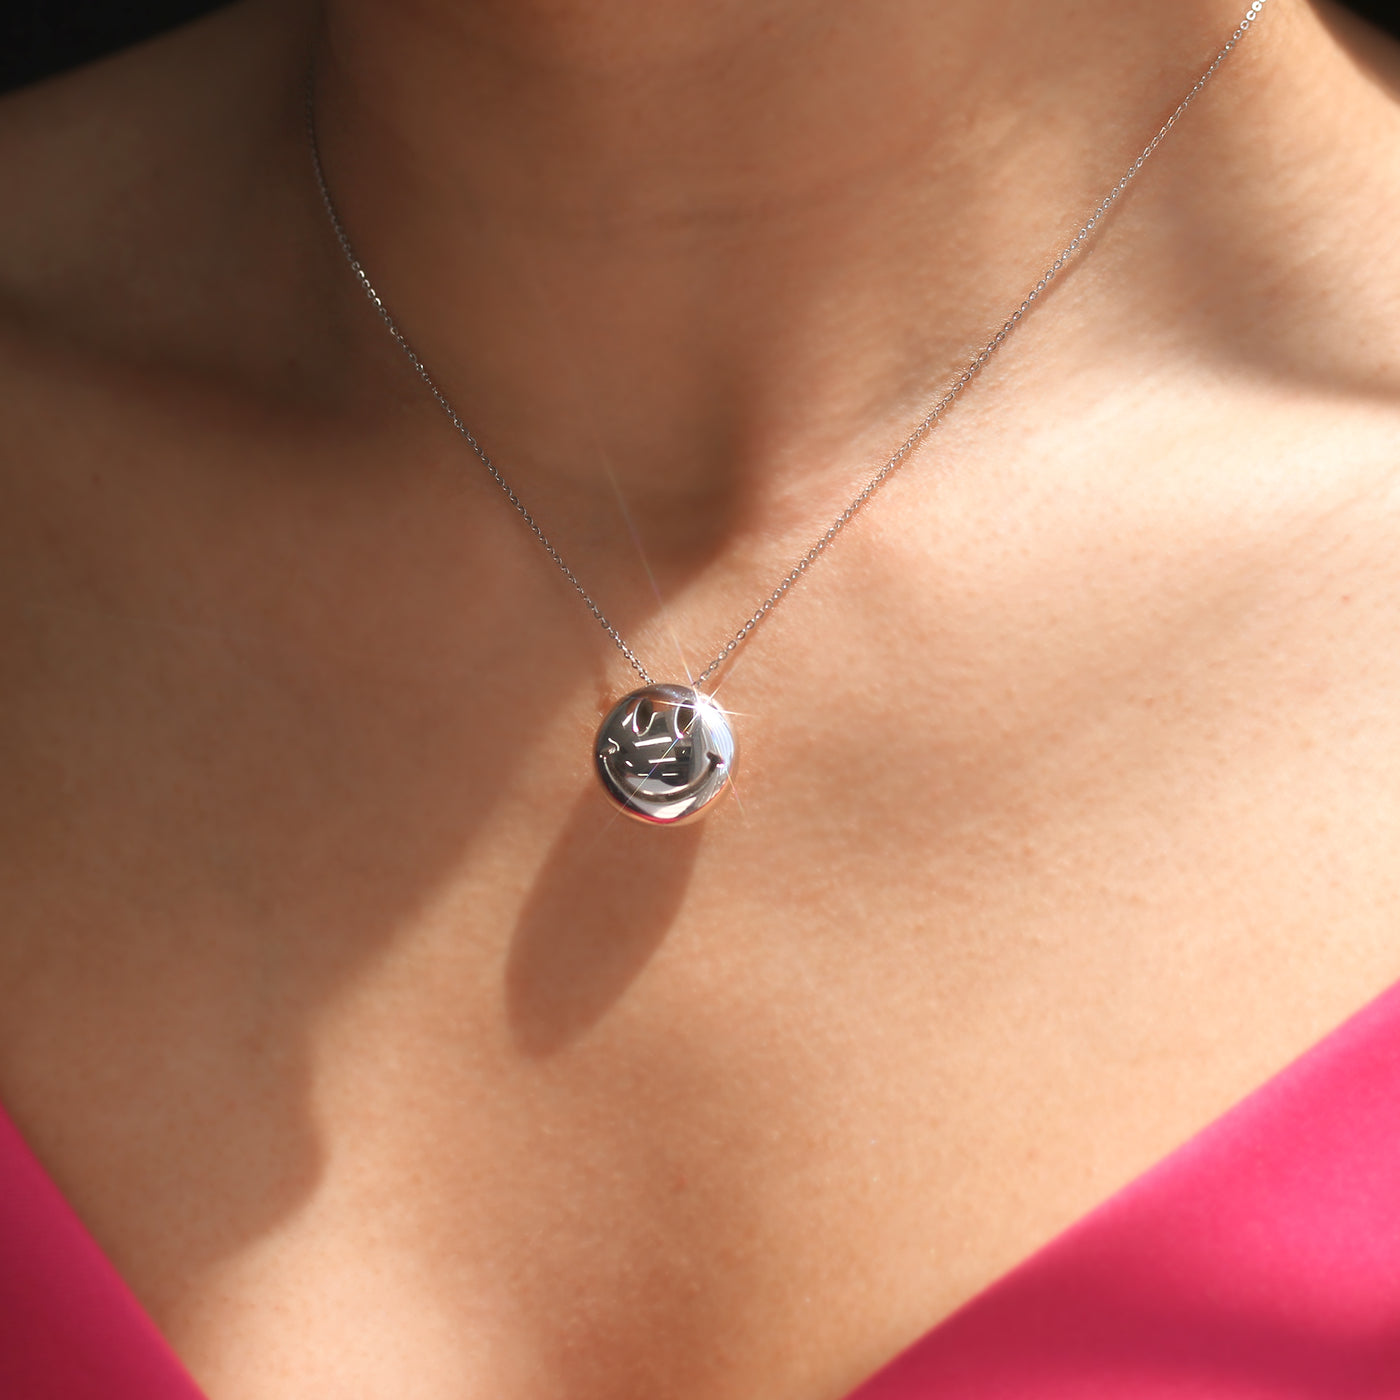 Radiate Joy with the Puffed Smiley Face Charm Necklace